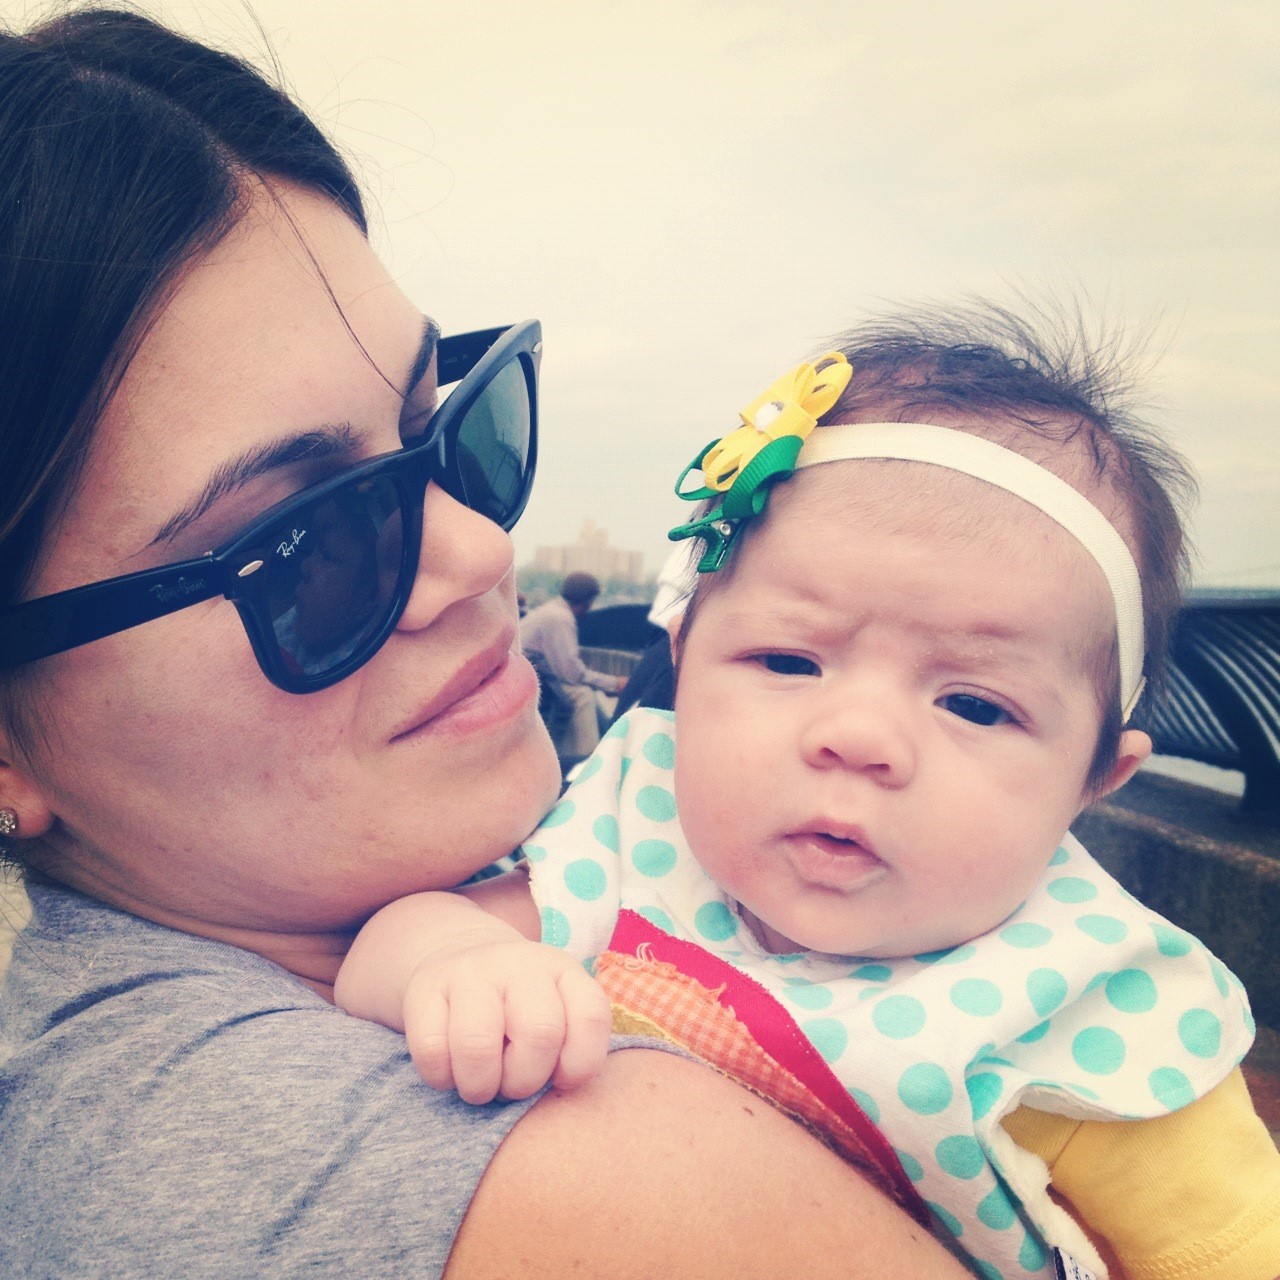 A mother wearing sun glasses holding her young infant 